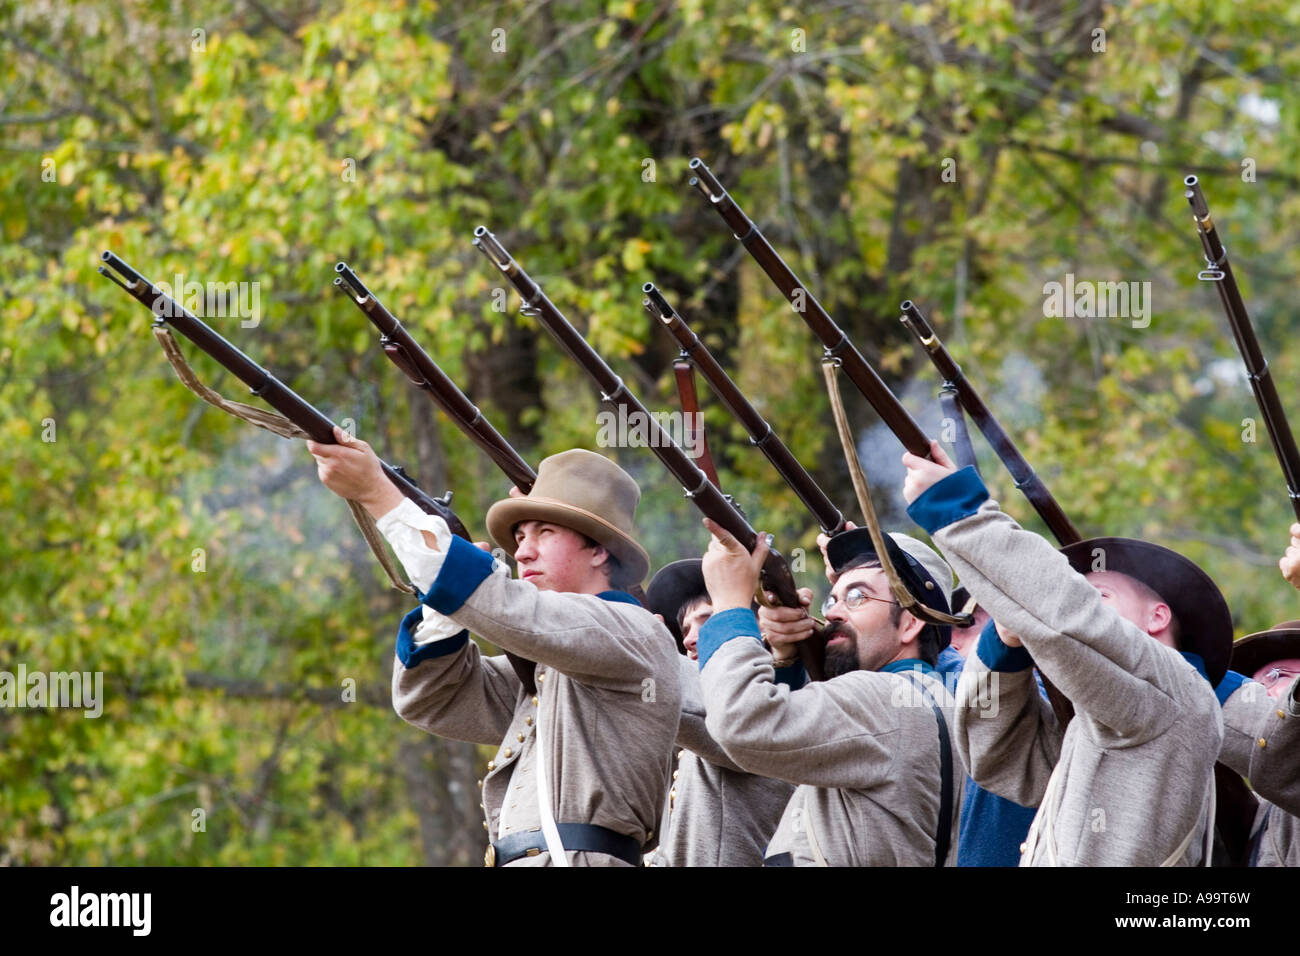 Arkansas AR USA Old Washington State Park Civil War Weekend Confederate soldiers at battle Stock Photo